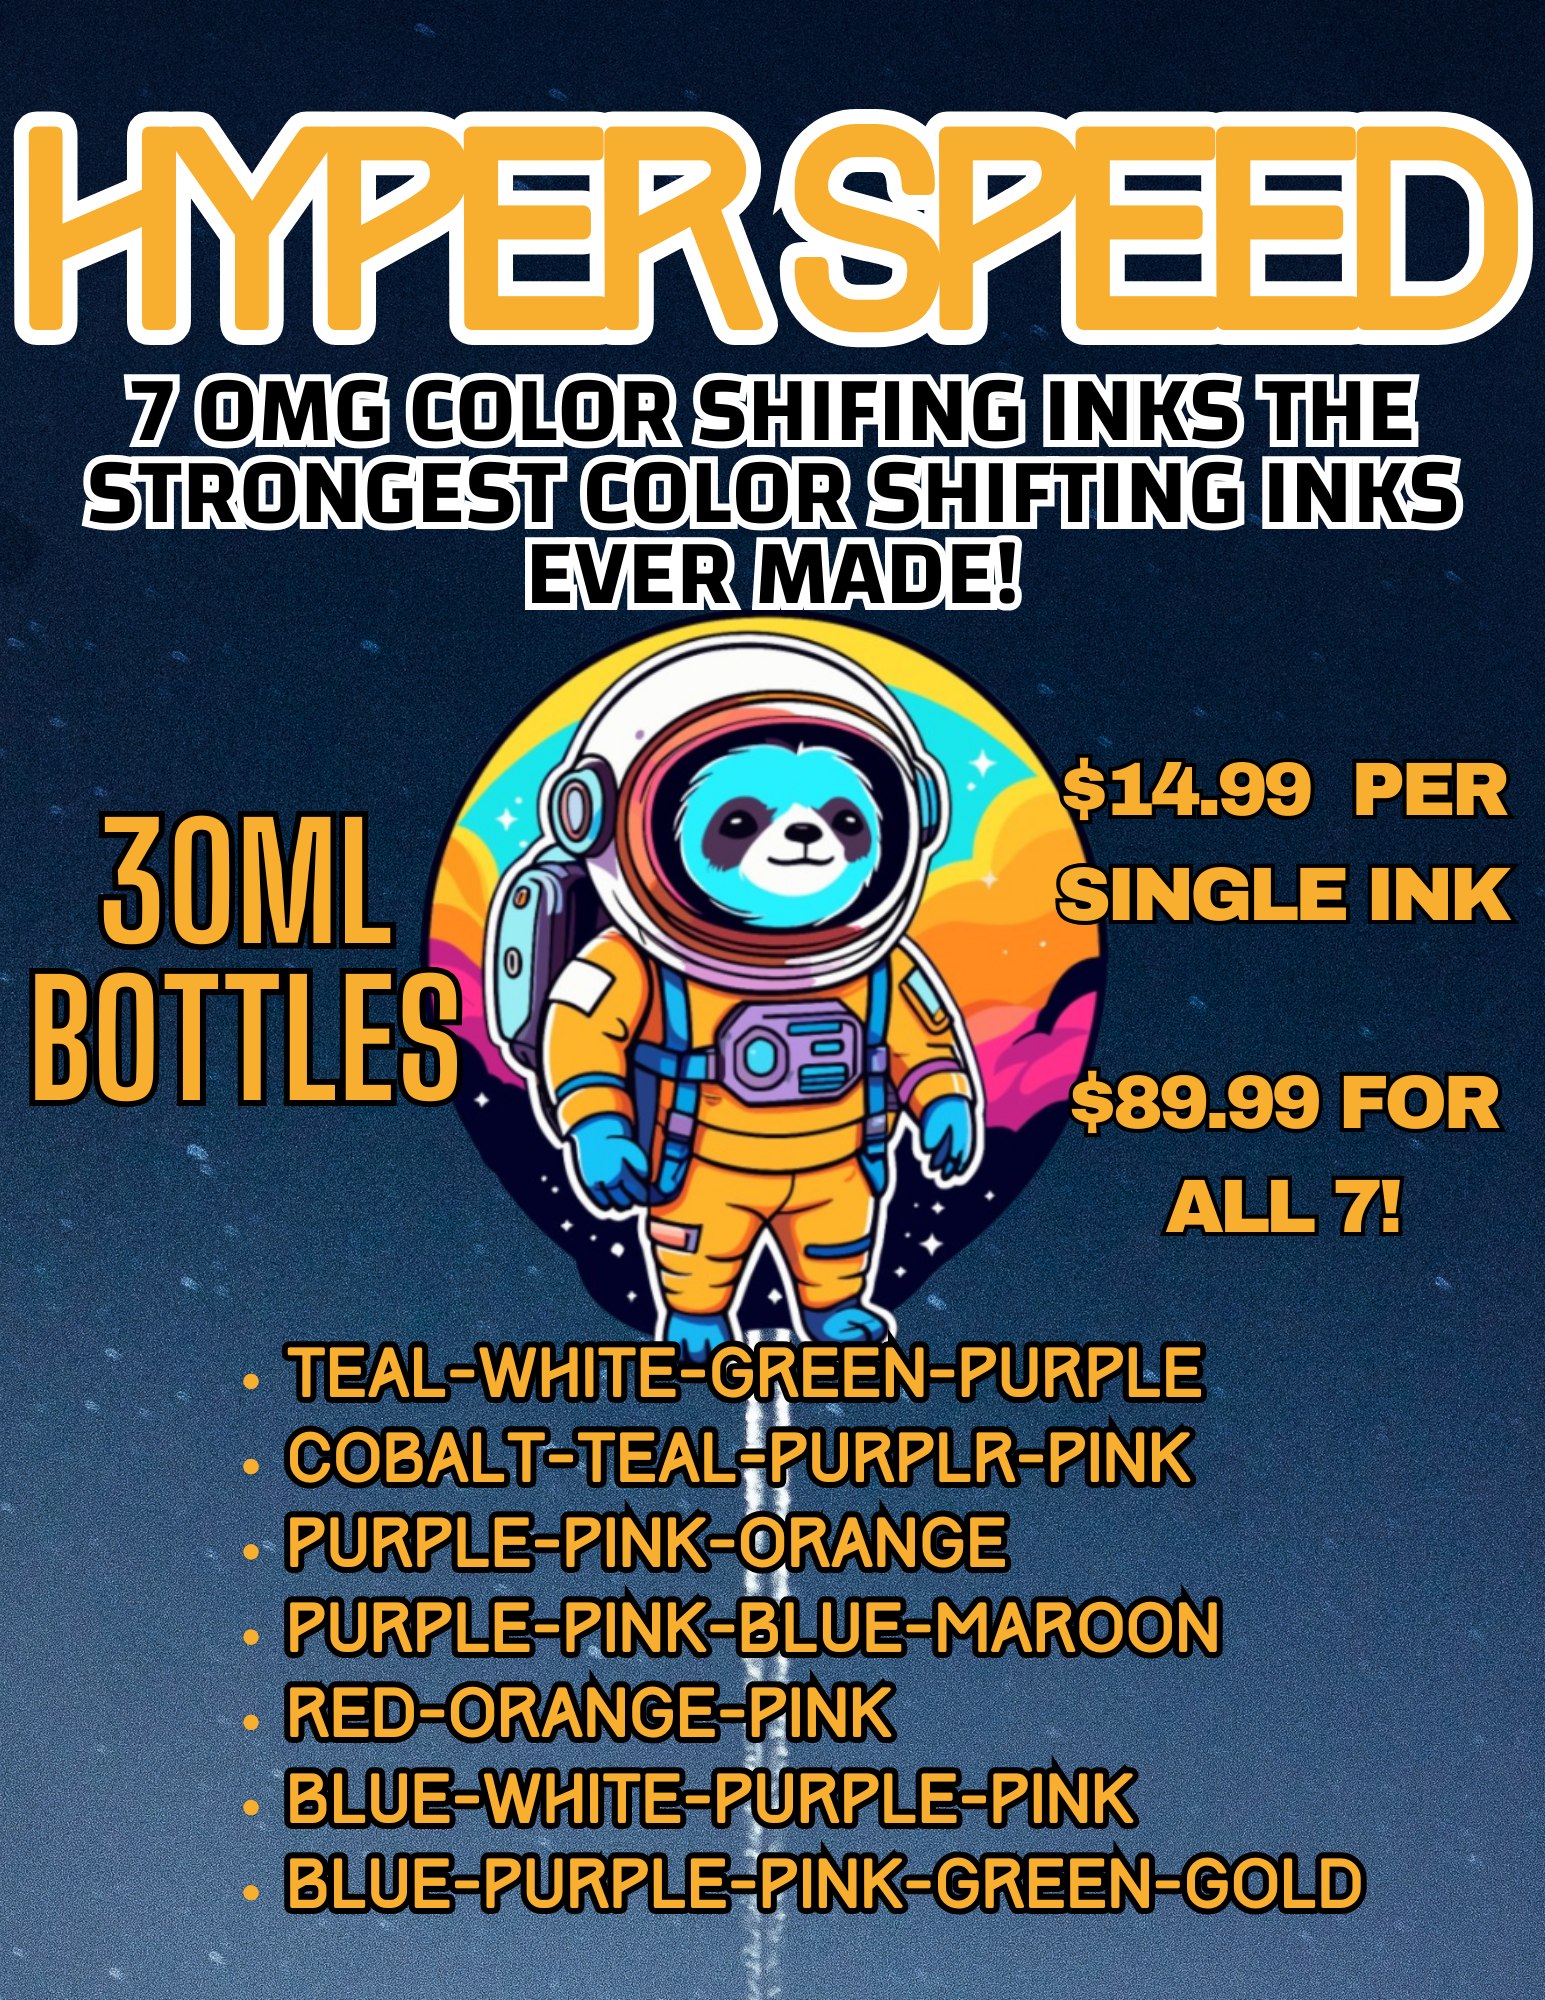 Hyper Speed Color Shifting Ink 30ml